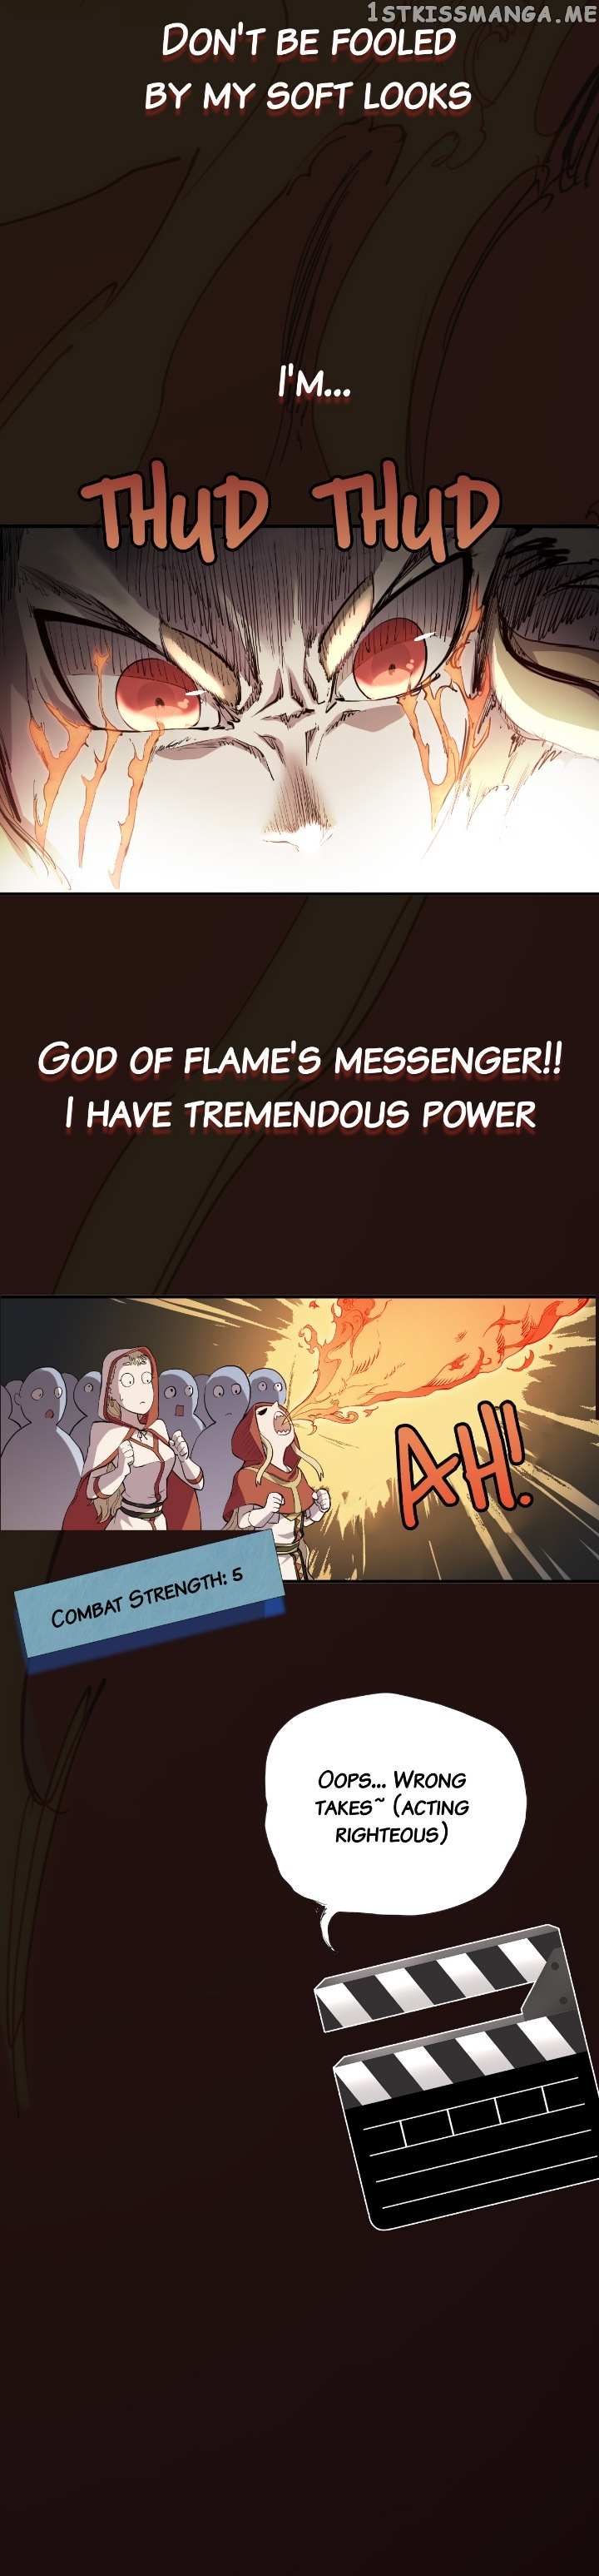 The God Of Flame - Page 3